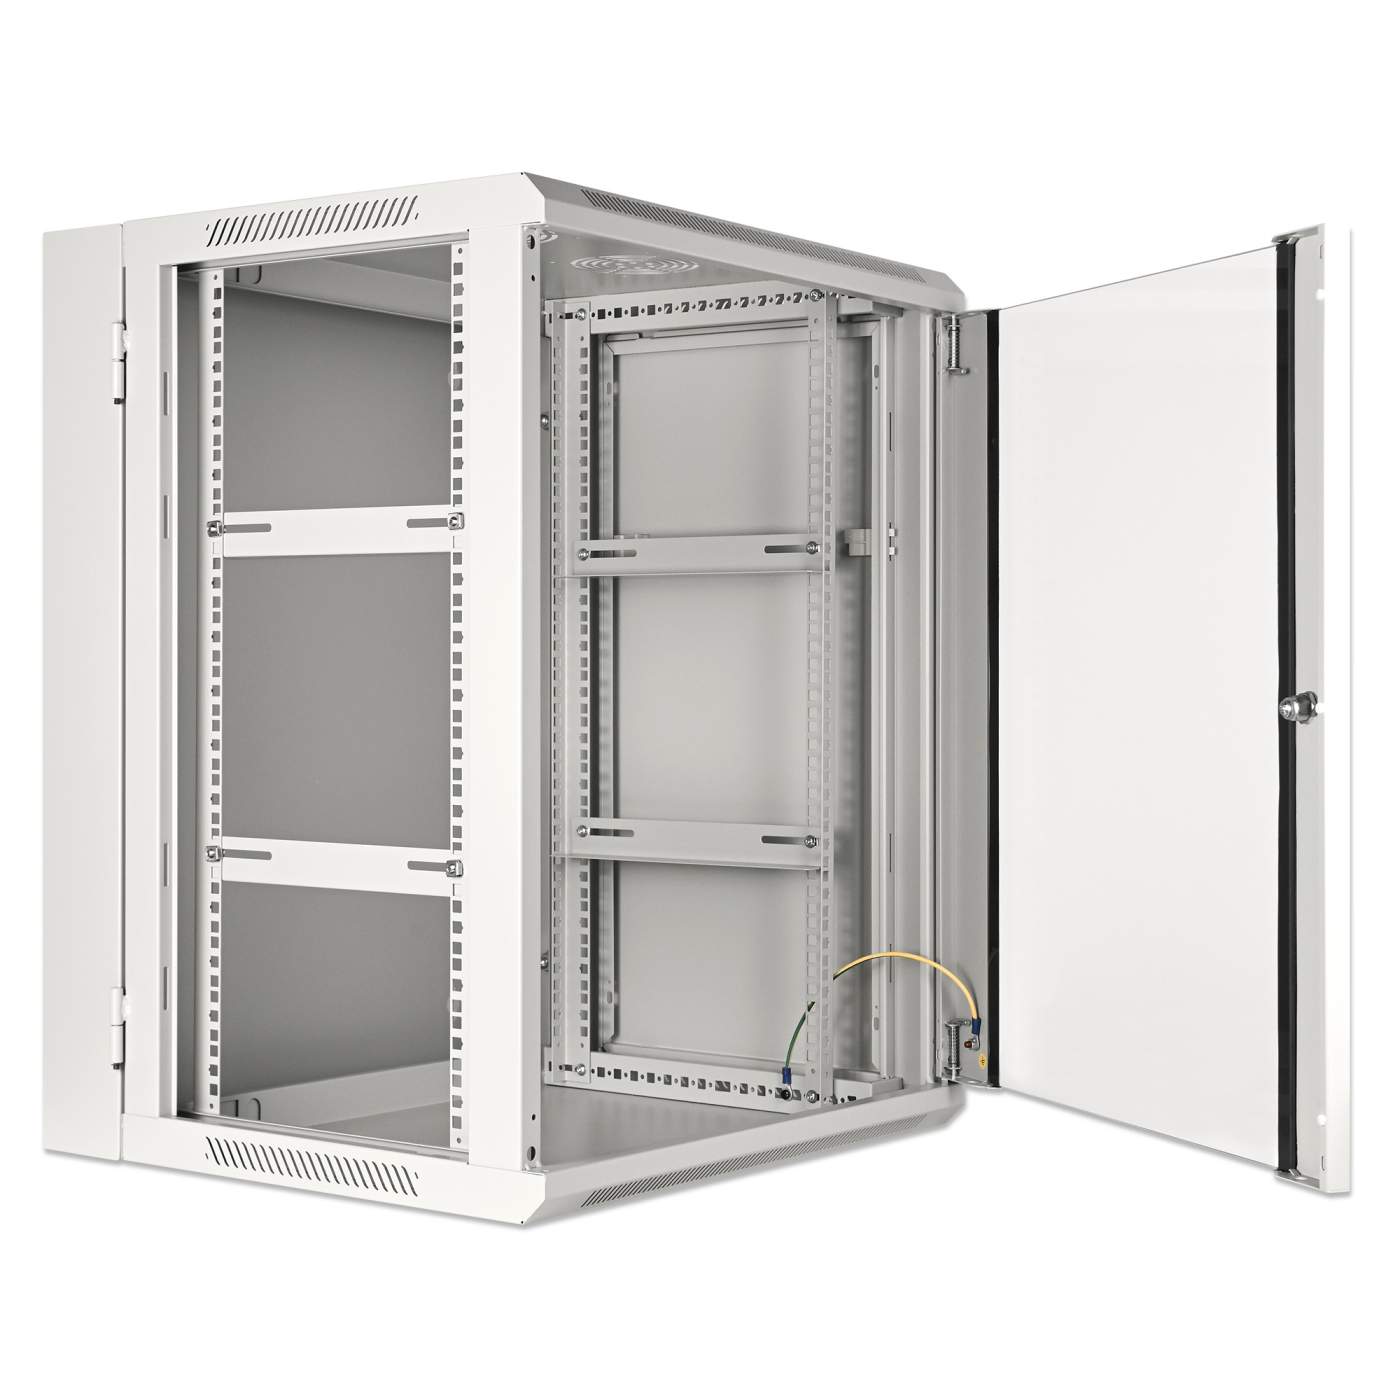 19" Double Section Wallmount Cabinet Image 5